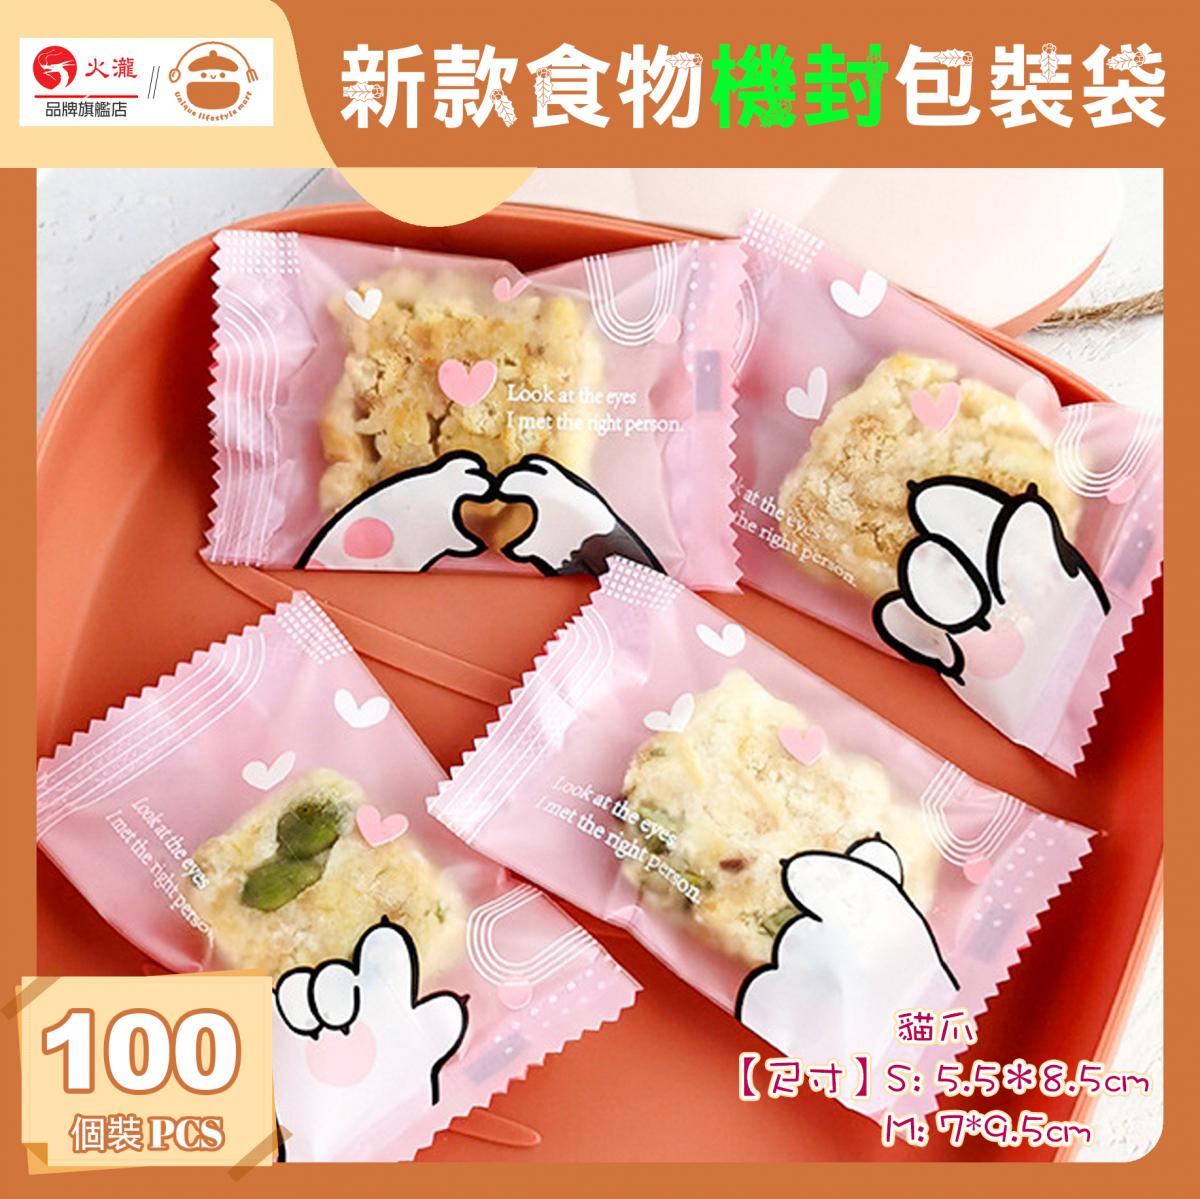 New Food Machine Seal Packaging Bag (Cat's Claw)【100pcs】 - Machine Seal Bag | Food Bag | Biscuit Bag | Candy Bag | Gift Bag | Baking Packaging Bag | Nougat Packaging Bag | Cookie Packaging Bag | Snowflake Crisp packing bag